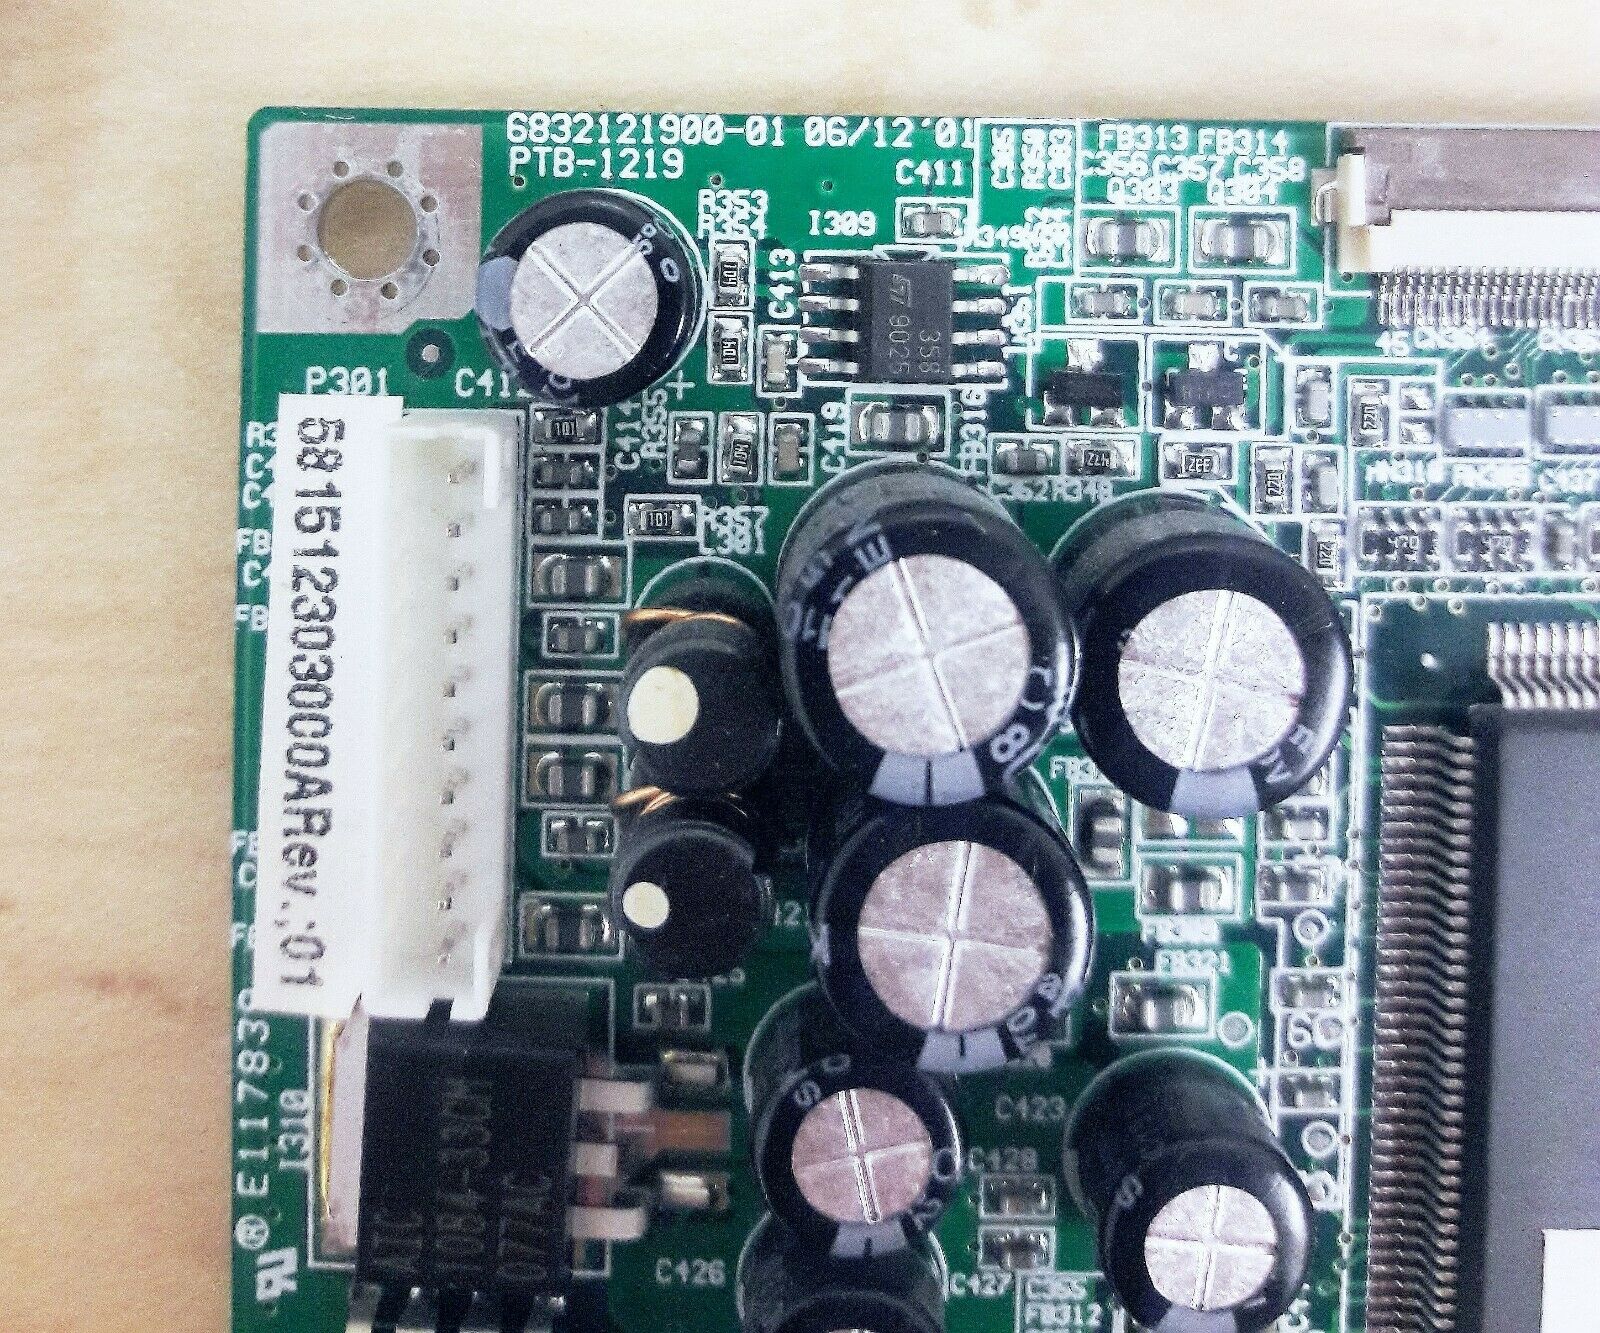 Tyco PTB 1219 LCD Display Video Controller Interface Board - 6832121900-01 ELO